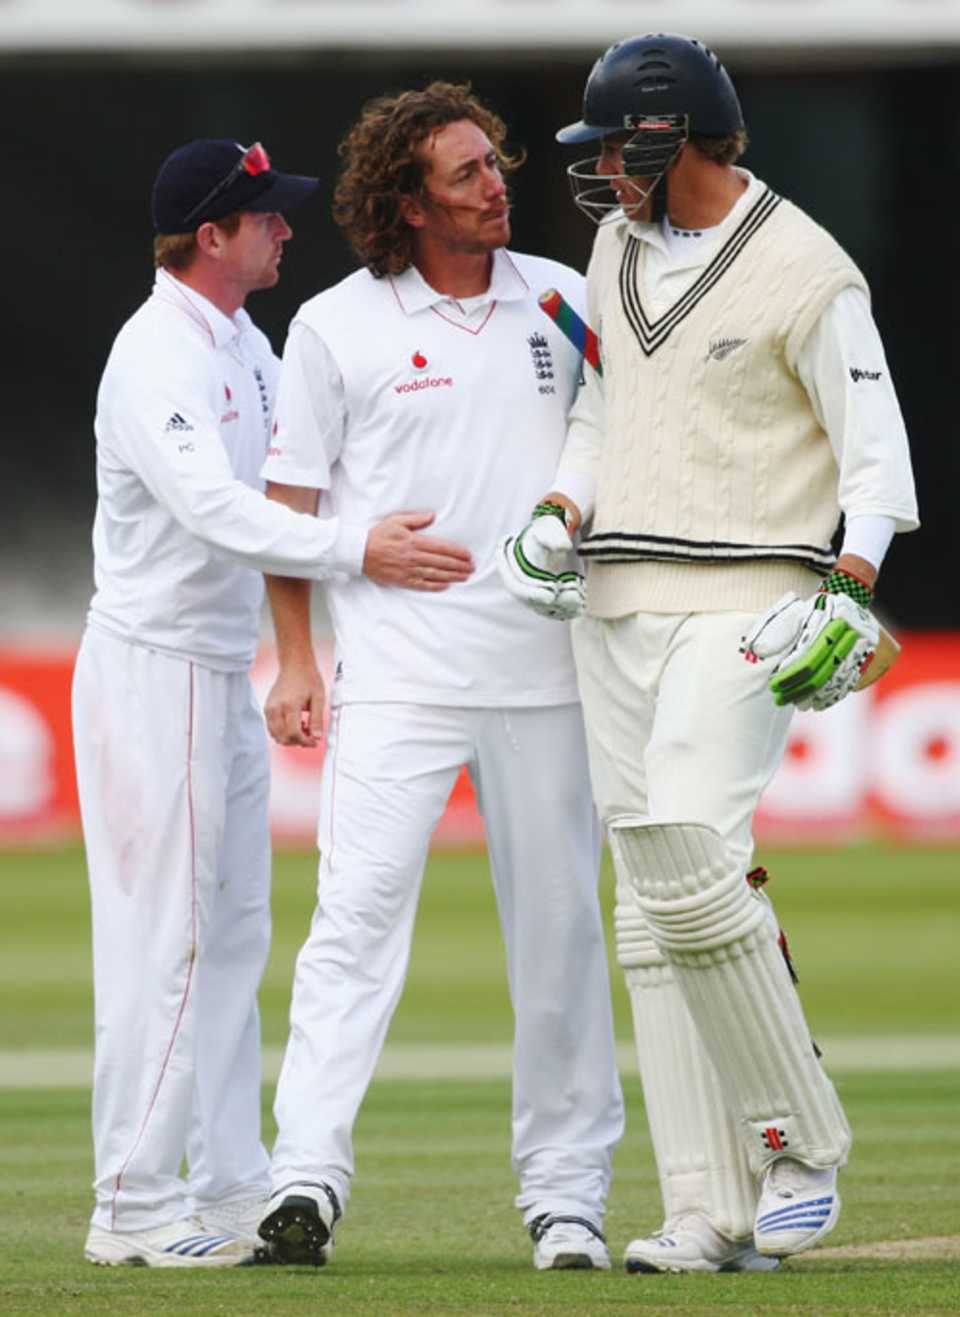 Ryan Sidebottom and Paul Collingwood congratulate Jacob Oram on his innings of 101